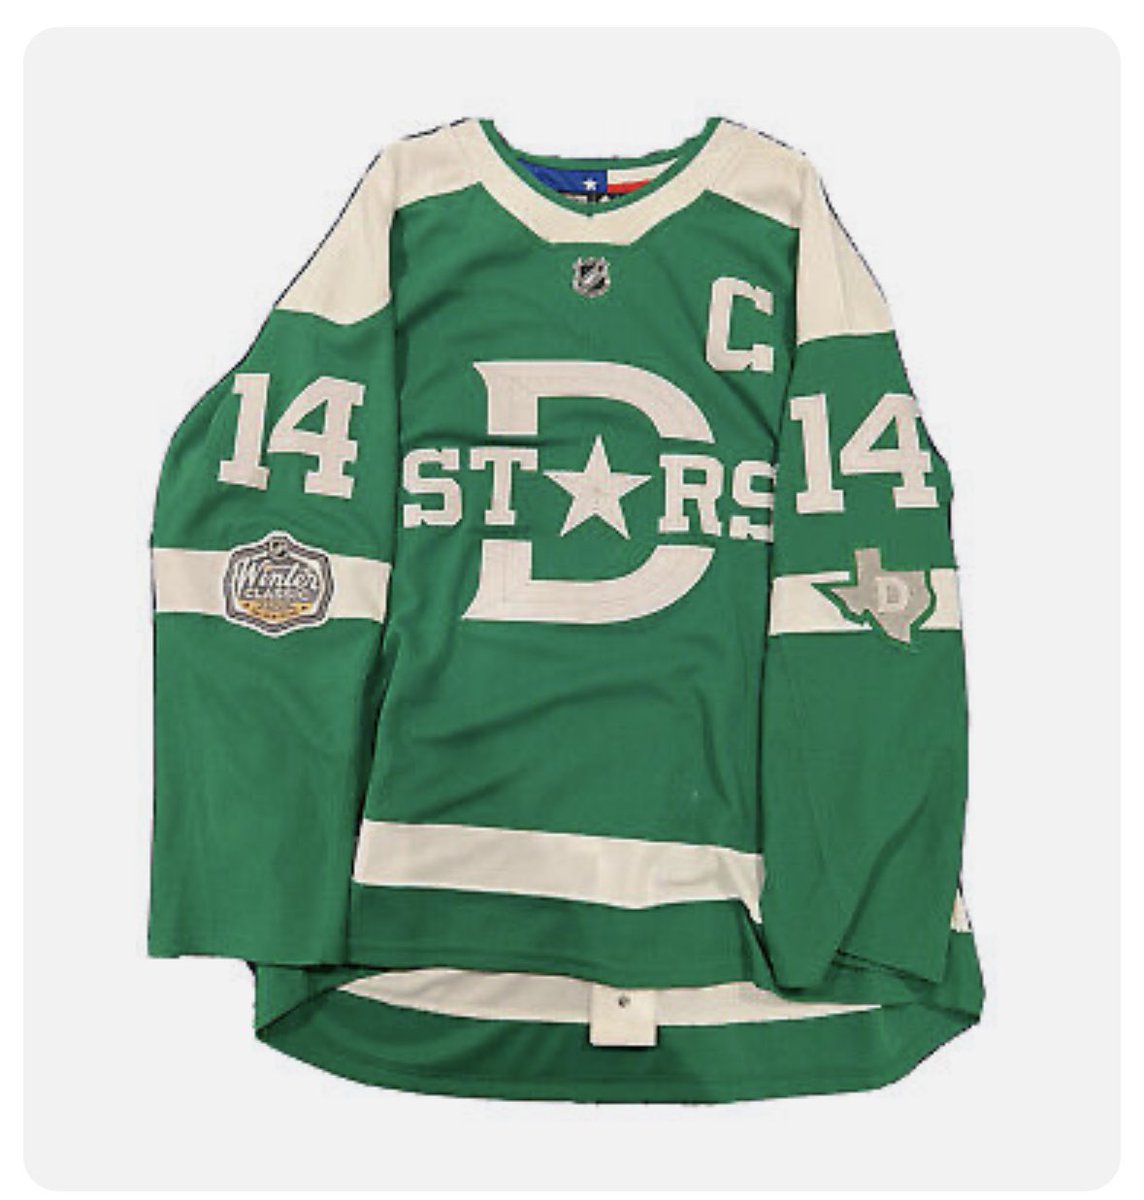 I couldn’t afford to get one of these jerseys when they first came out, but I finally got one on eBay. I can’t wait for it to get here, I’ll be wearing it on game #1000 for the captain. #TexasHockey #OneStateOneTeam